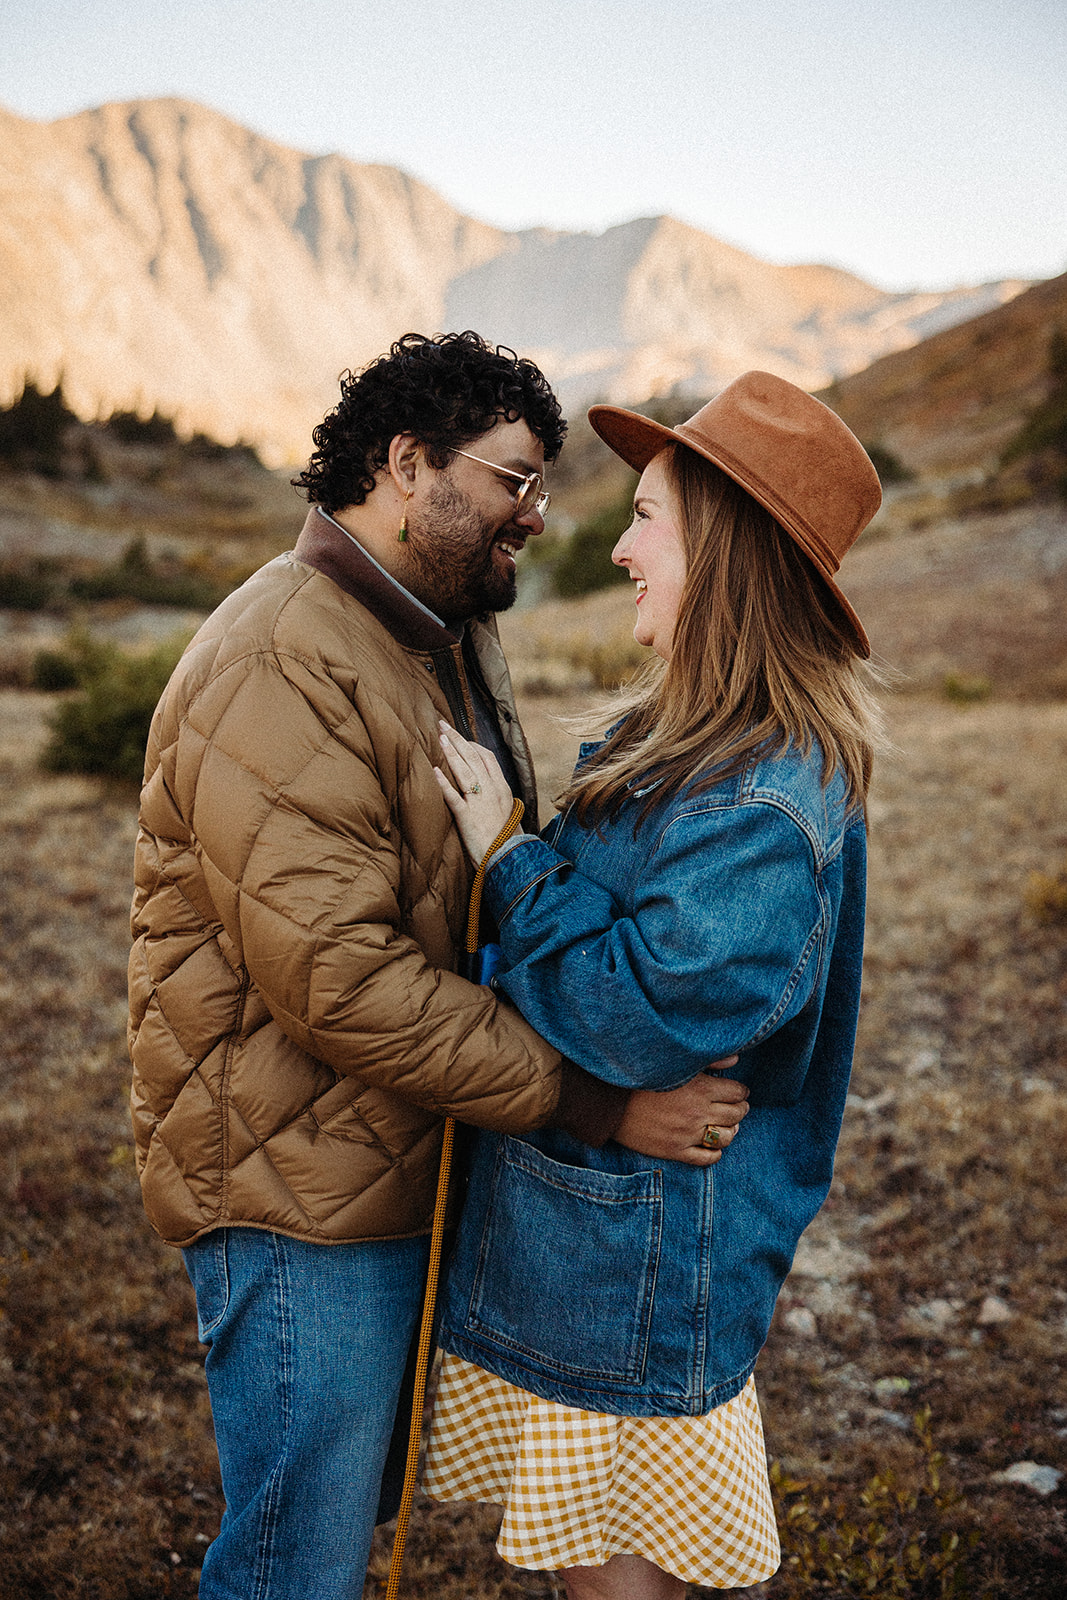 The fiances smile and look deeply into each other's eyes while the tall mountains ignite with the golden hour light.